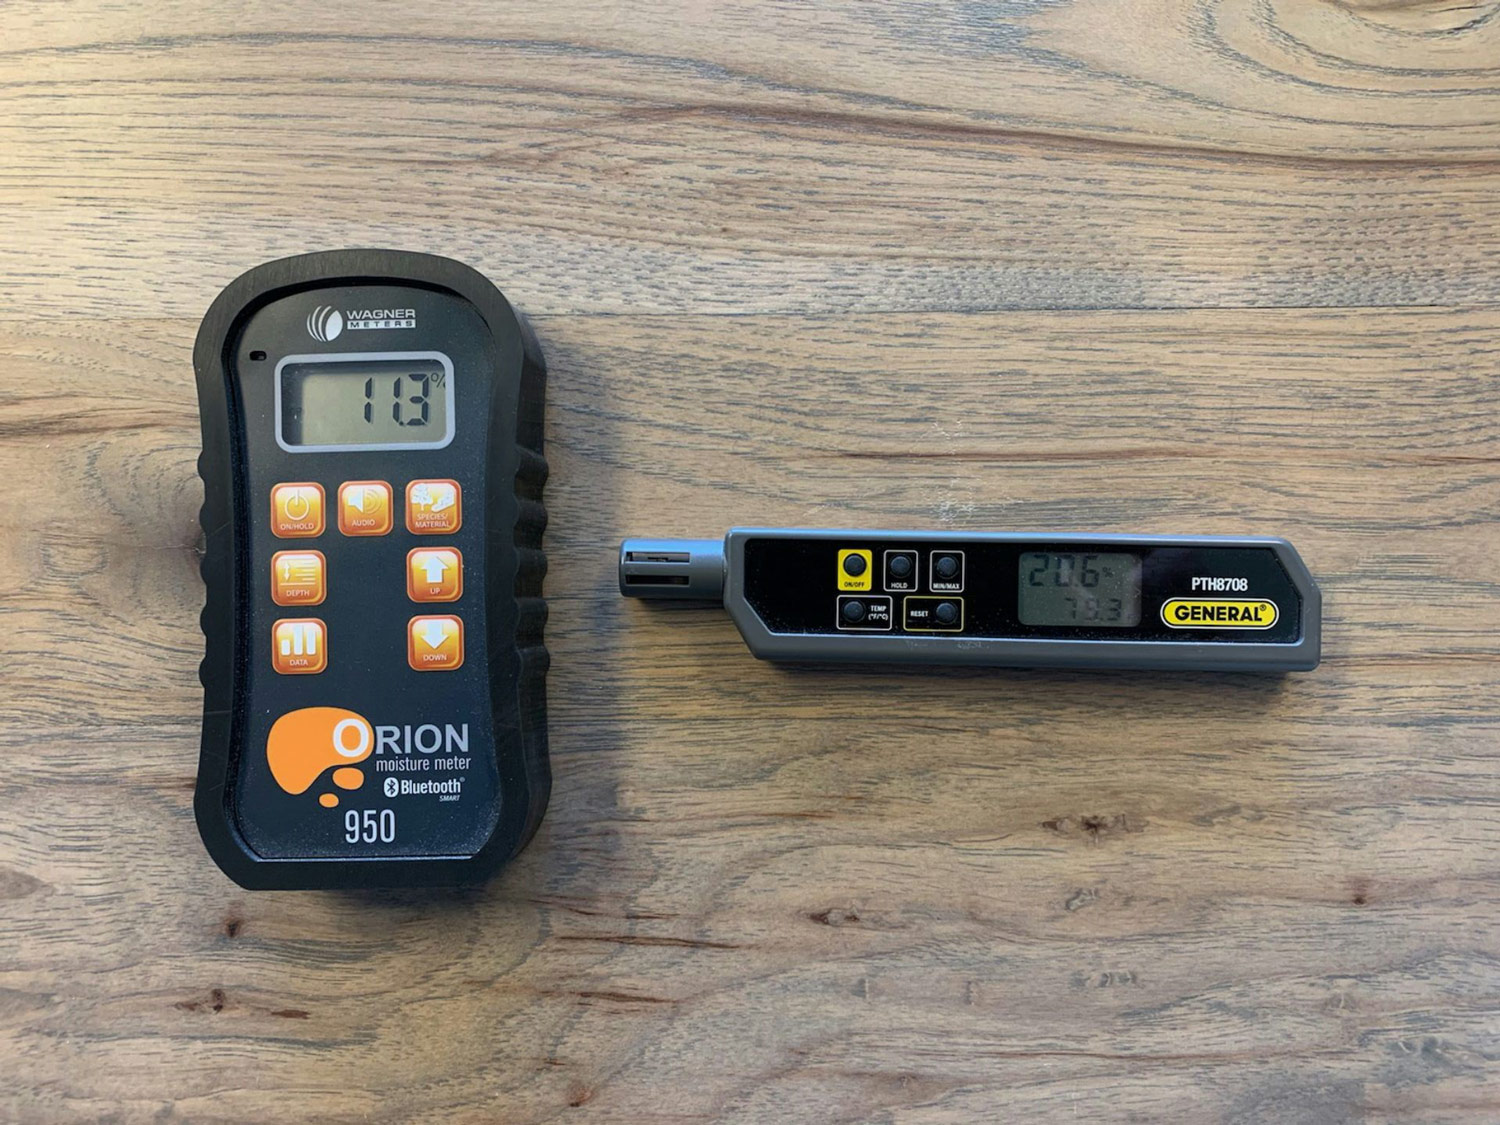 An example of our Orion moisture metre and humidity tester for hardwood flooring. This helps us minimize cracking and gapping in hardwood floors due to humidity changes in your Utah home.